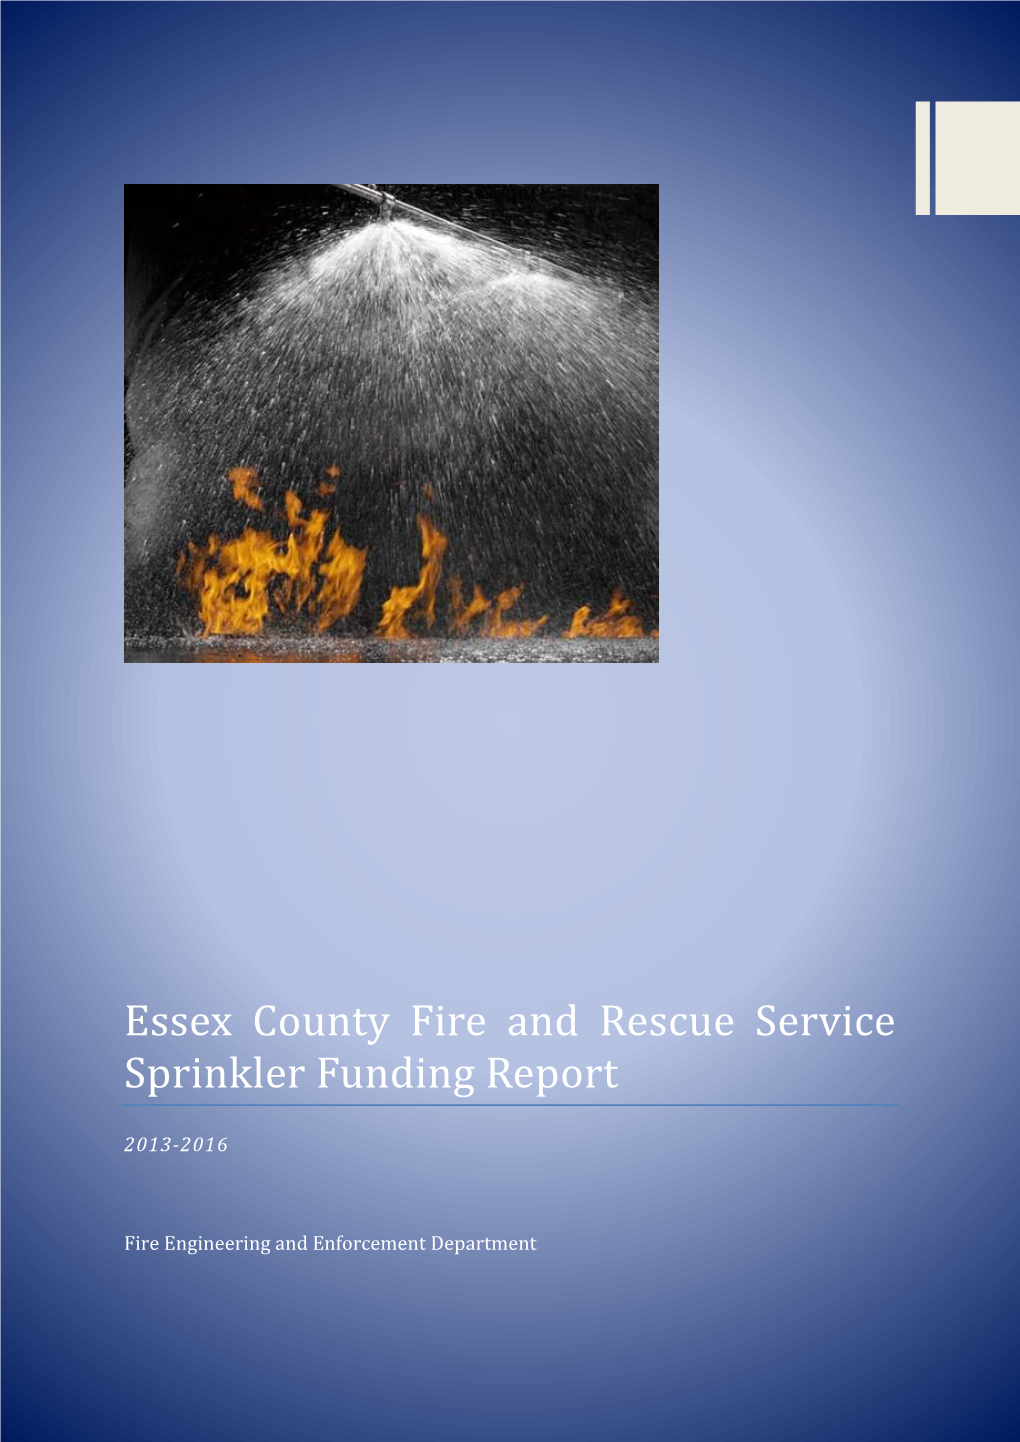 Essex County Fire and Rescue Service Sprinkler Funding Report